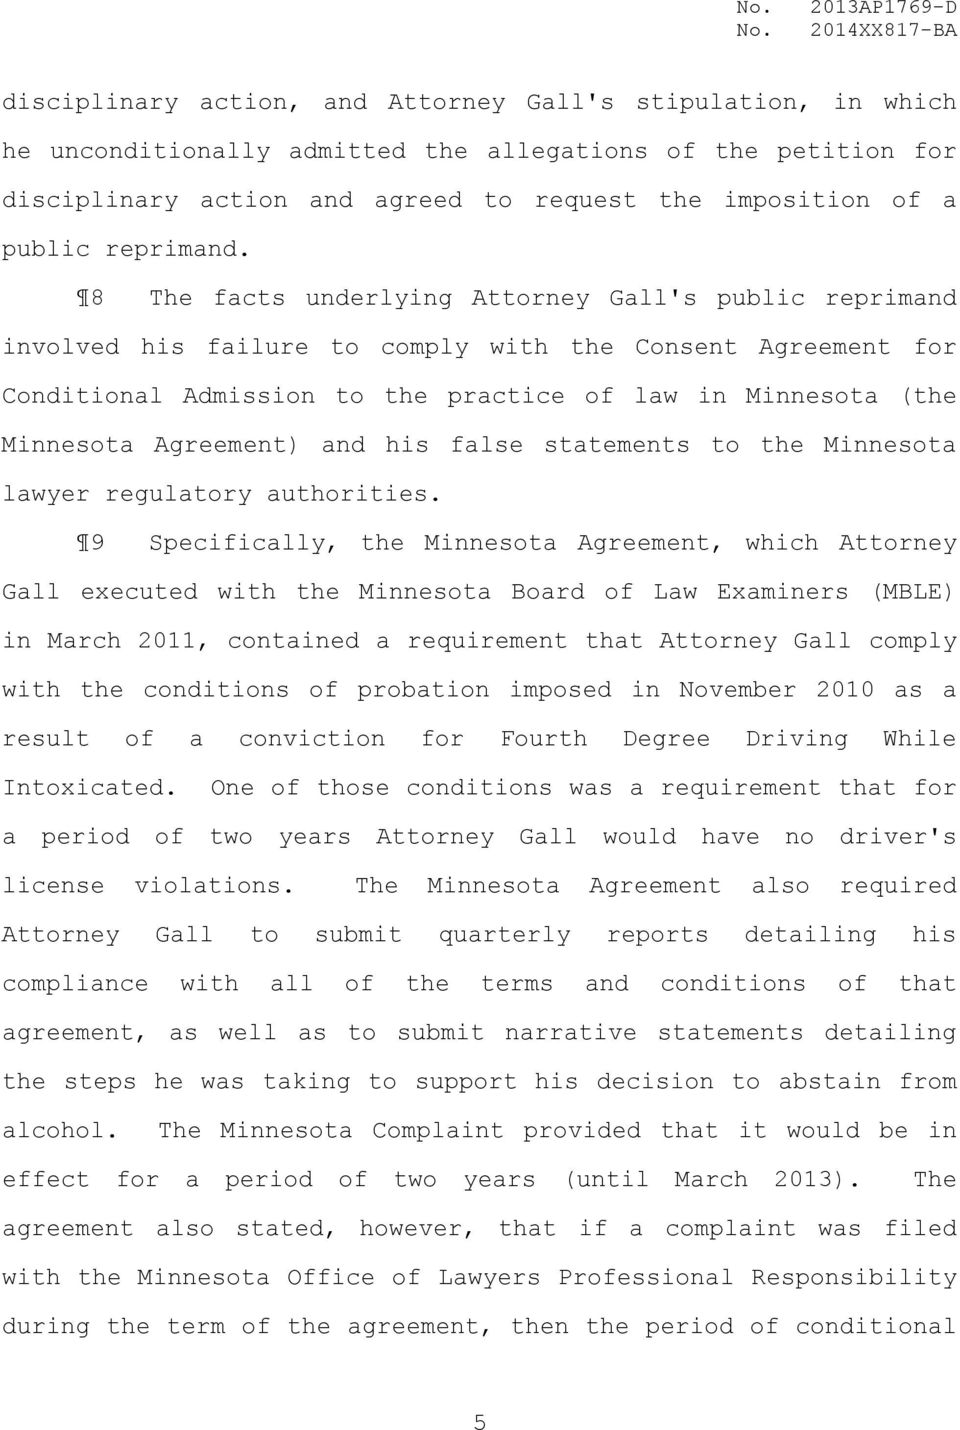 8 The facts underlying Attorney Gall's public reprimand involved his failure to comply with the Consent Agreement for Conditional Admission to the practice of law in Minnesota (the Minnesota